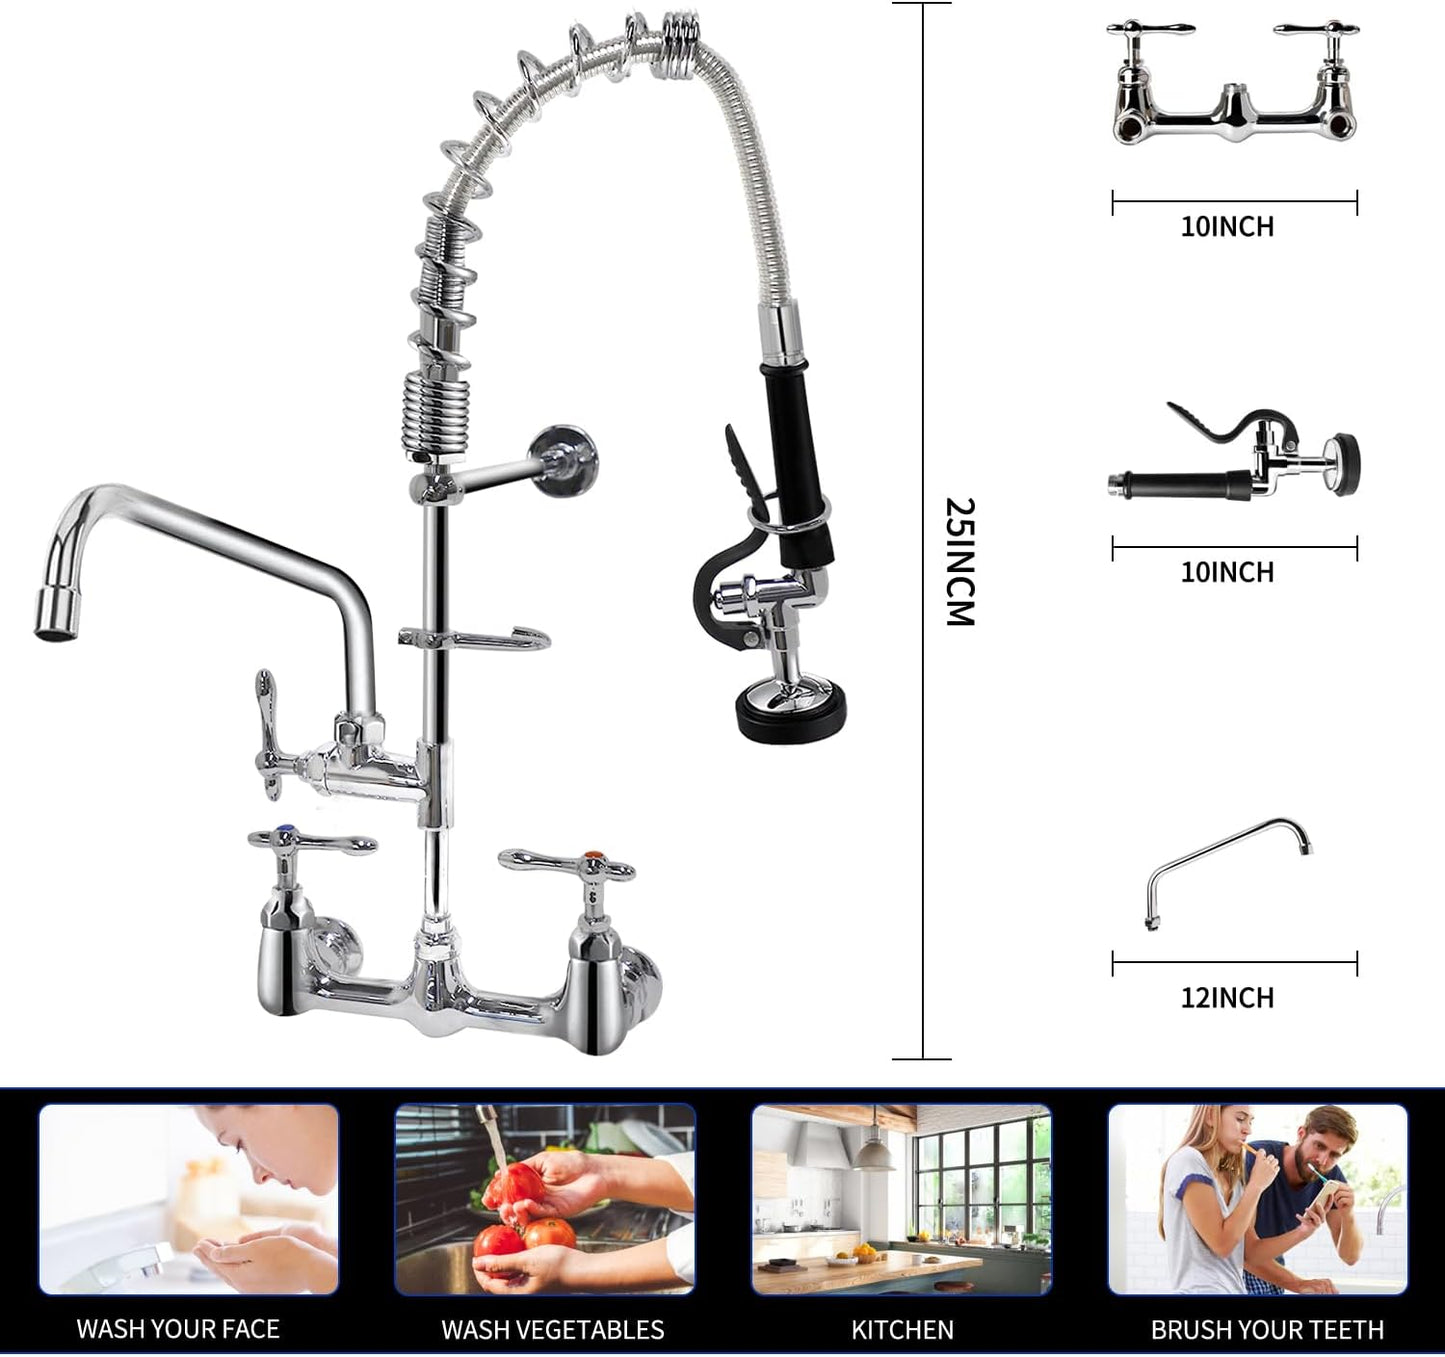 QANBAIN Commercial Sink Faucet,Commercial Faucet with Sprayer 8 Adjustable Center Wall Mounted Restaurant Faucets,12" Spout andPull-Down Pre-Rinse Faucet 25 Height Suitable for 1, 2 or 3 Sinks (